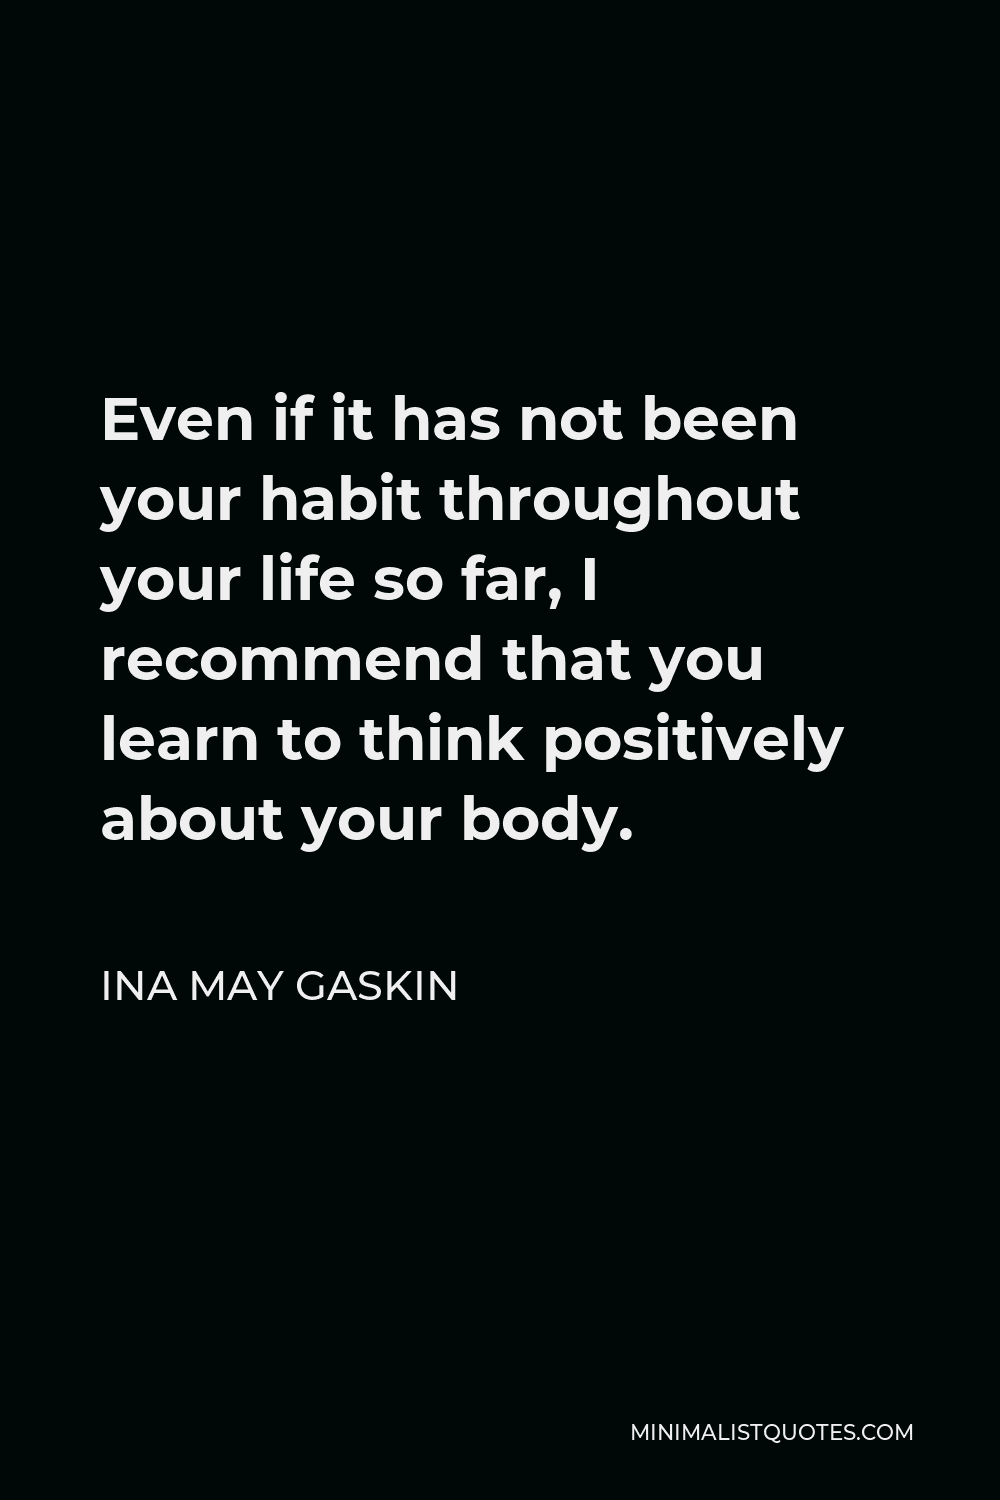 Ina May Gaskin Quote - Even if it has not been your habit throughout your life so far, I recommend that you learn to think positively about your body.